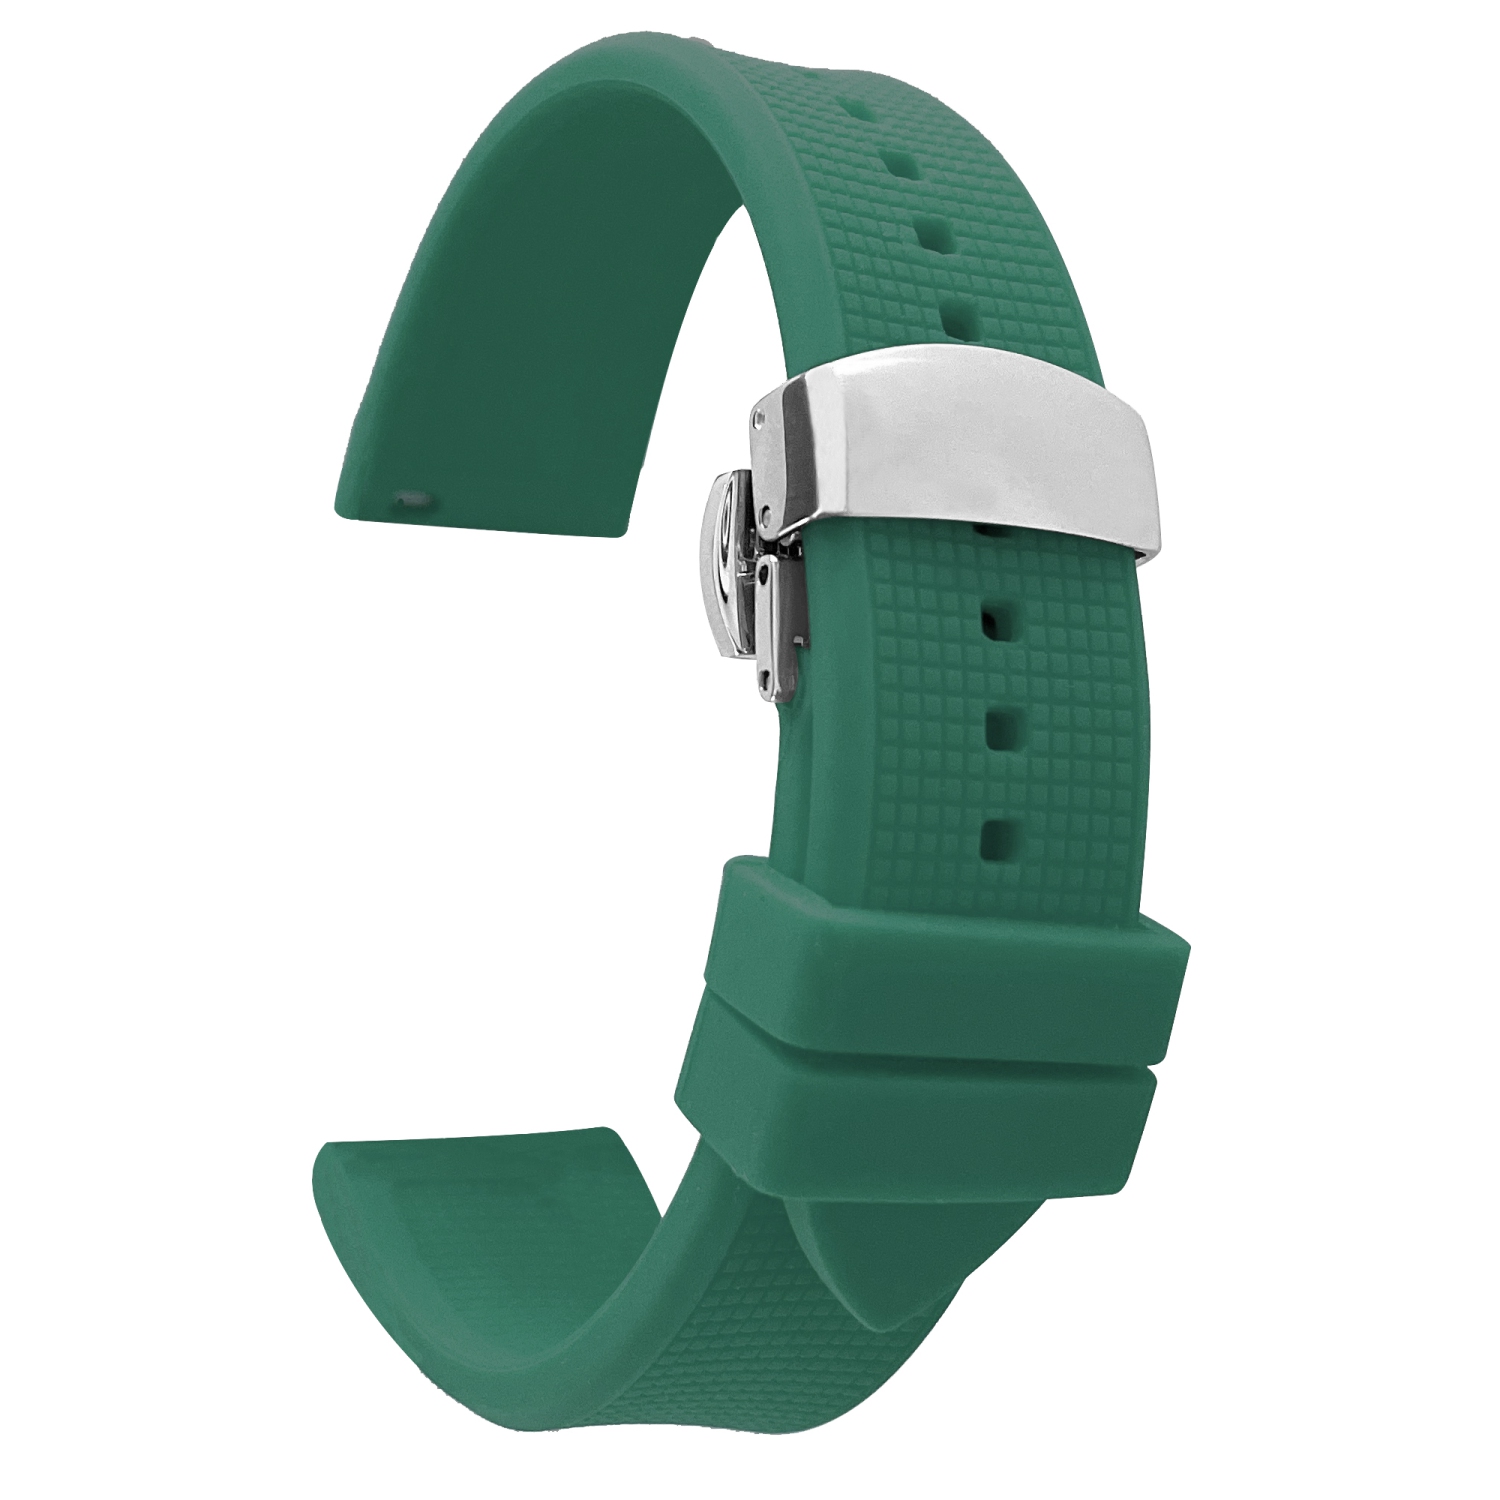 Bandini Waterproof Soft Rubber Silicone Deployment Smart Watch Band Strap For Mobvoi Ticwatch E2, S2, Pro, Pro 3 - 22mm, Green